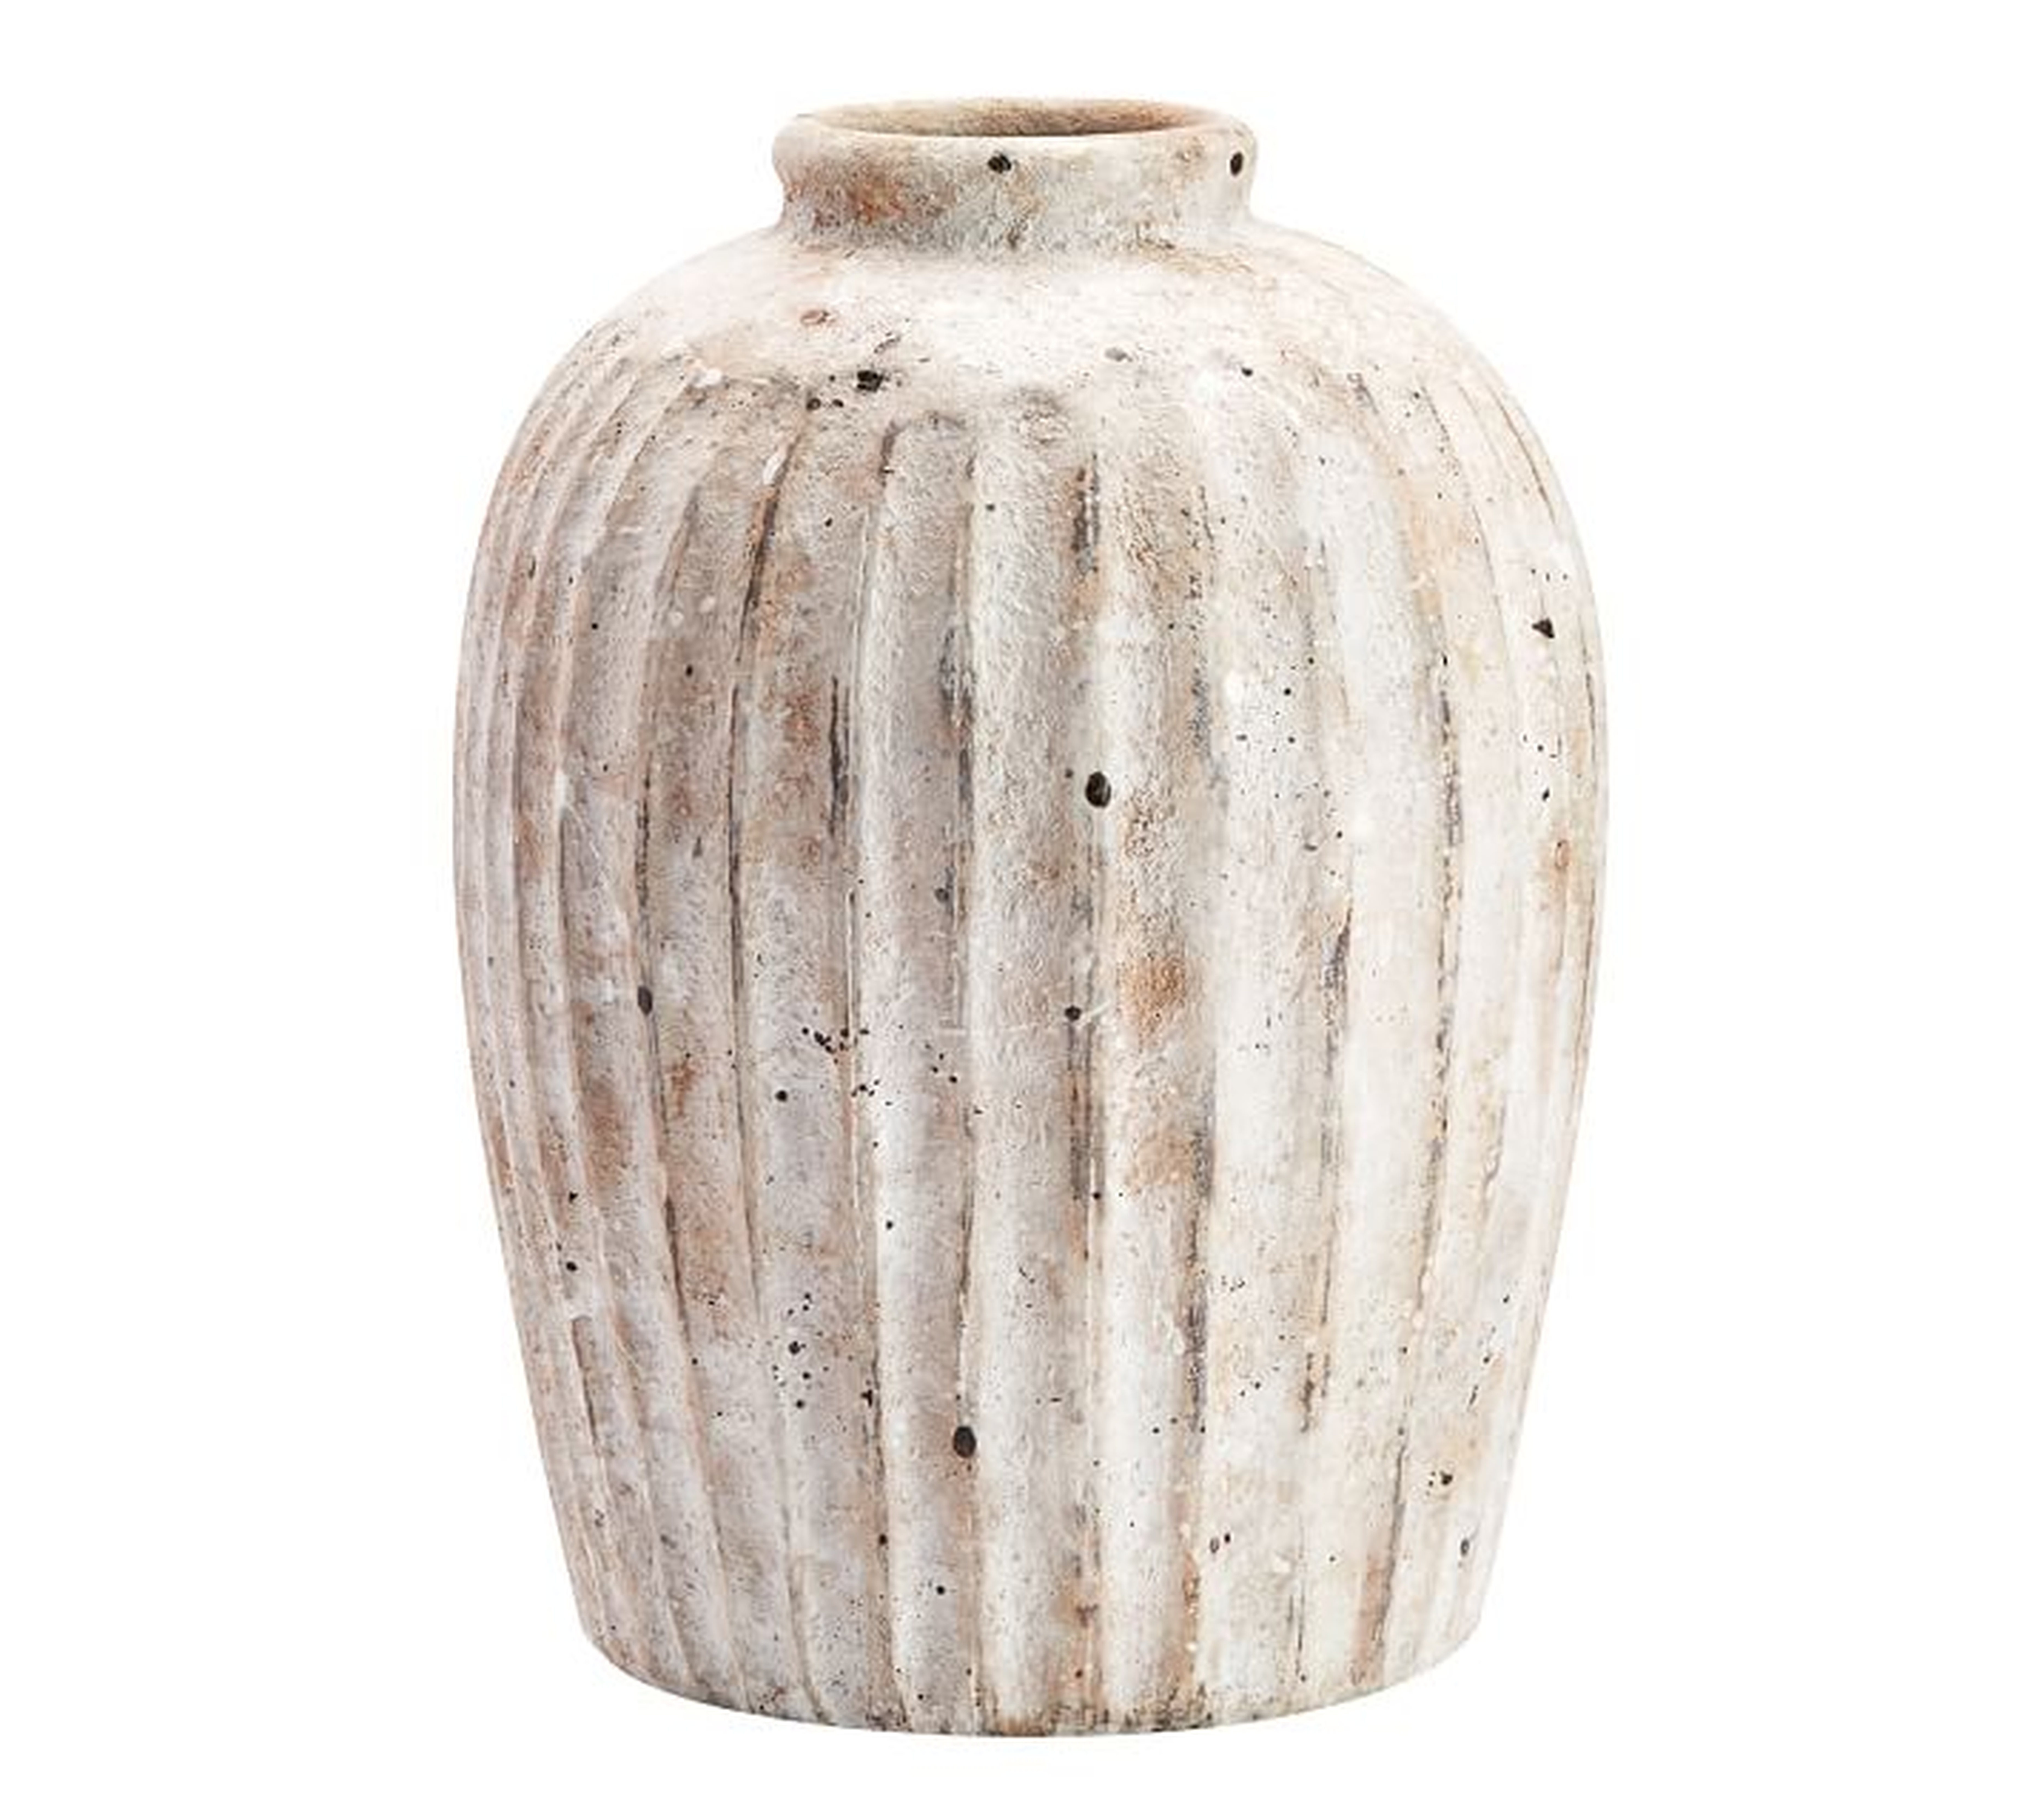 Handcrafted Weathered Terra Cotta Vase, White, Small, 11.25"H - Pottery Barn